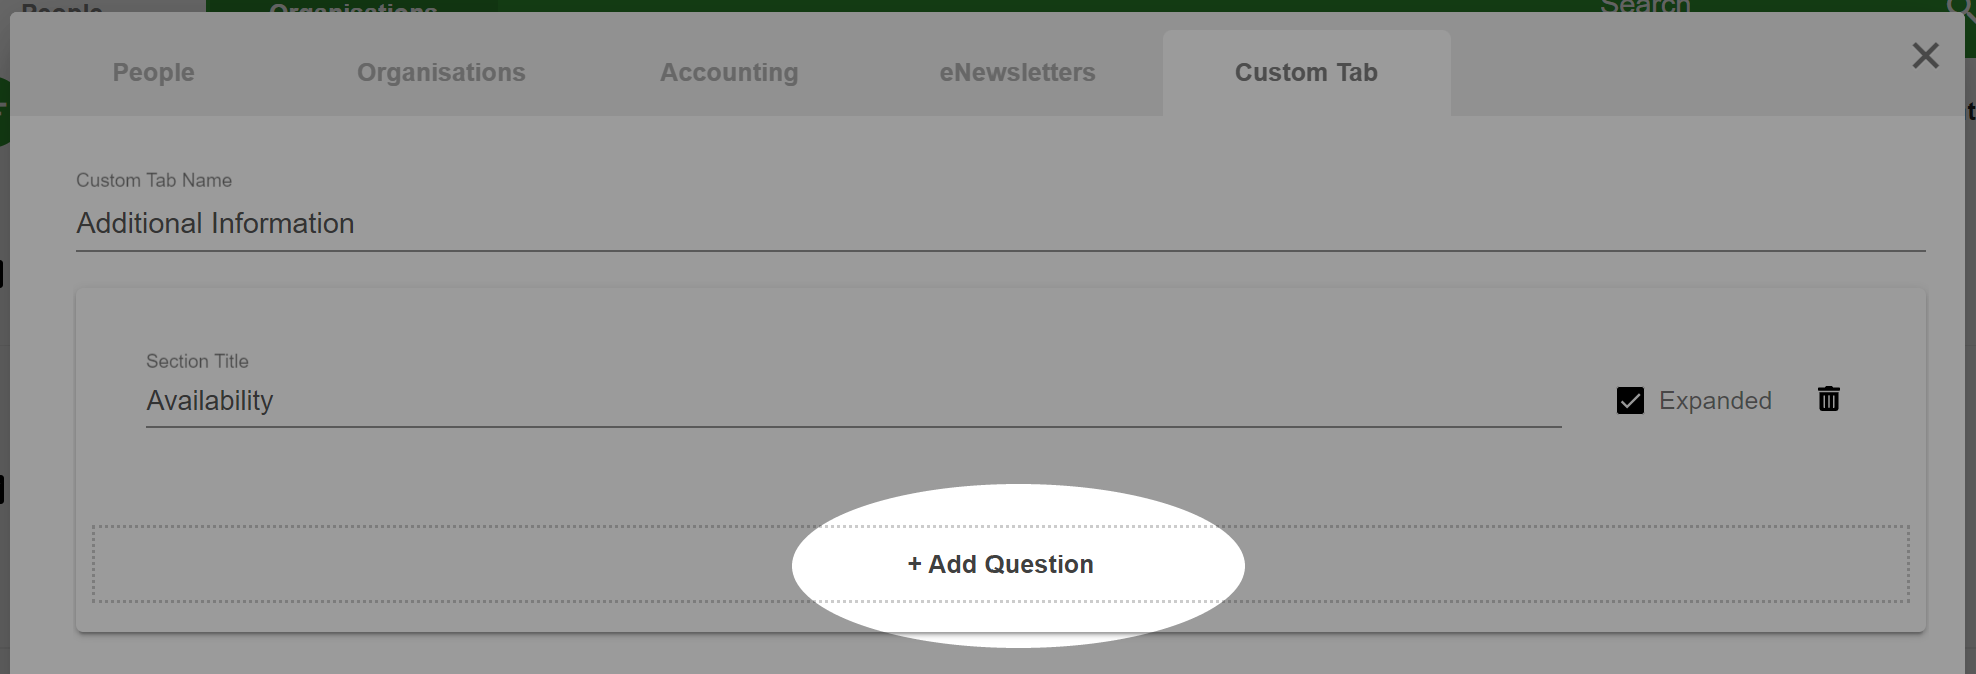 add question field.png